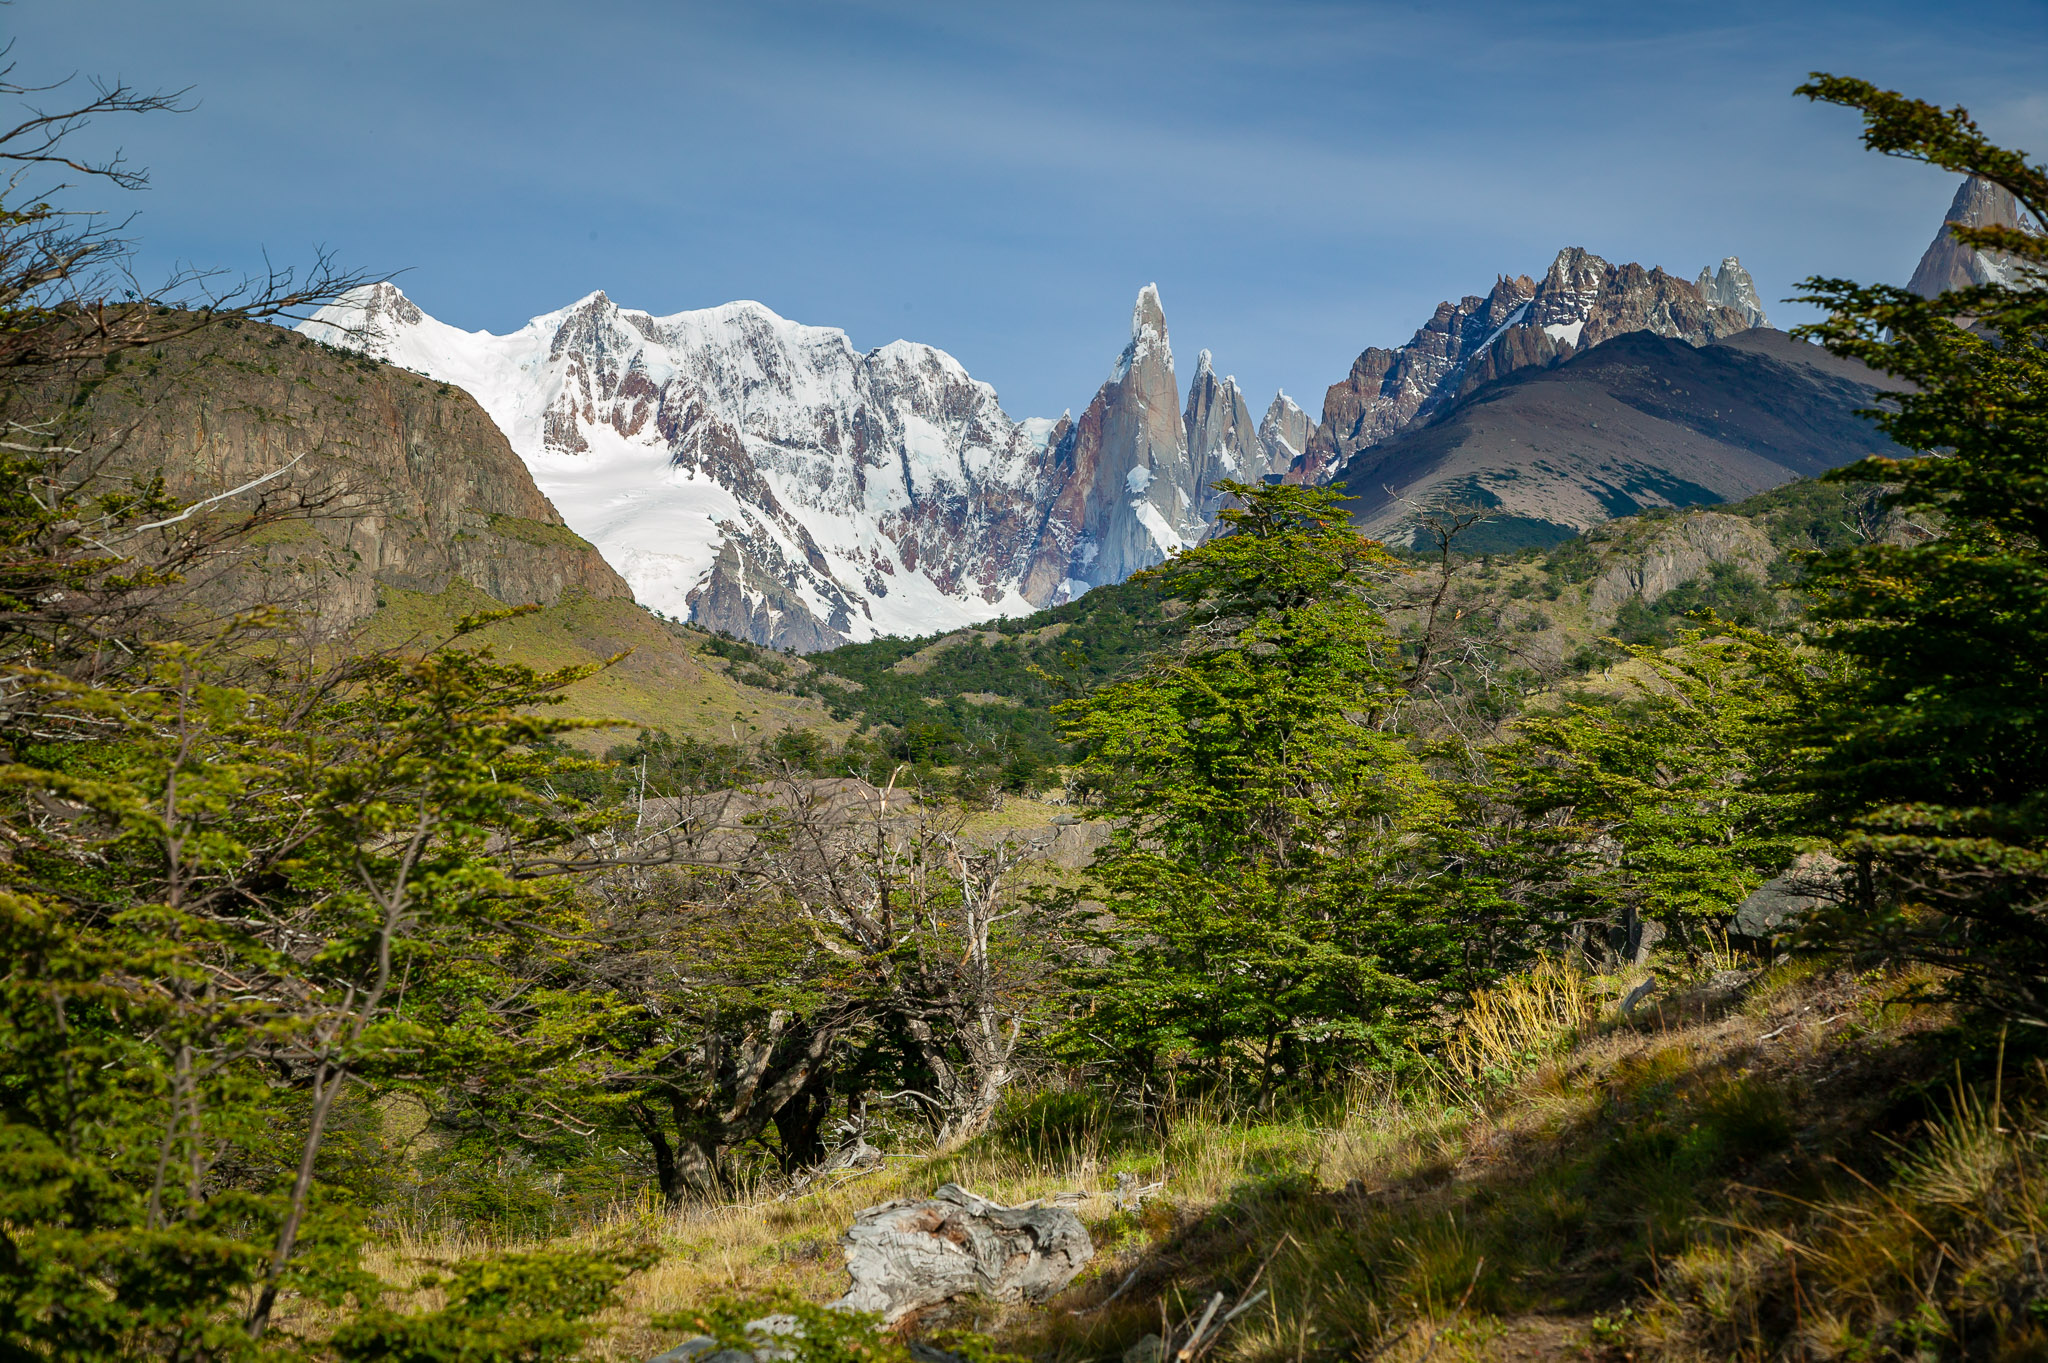 First view of Cerro Torre from trail